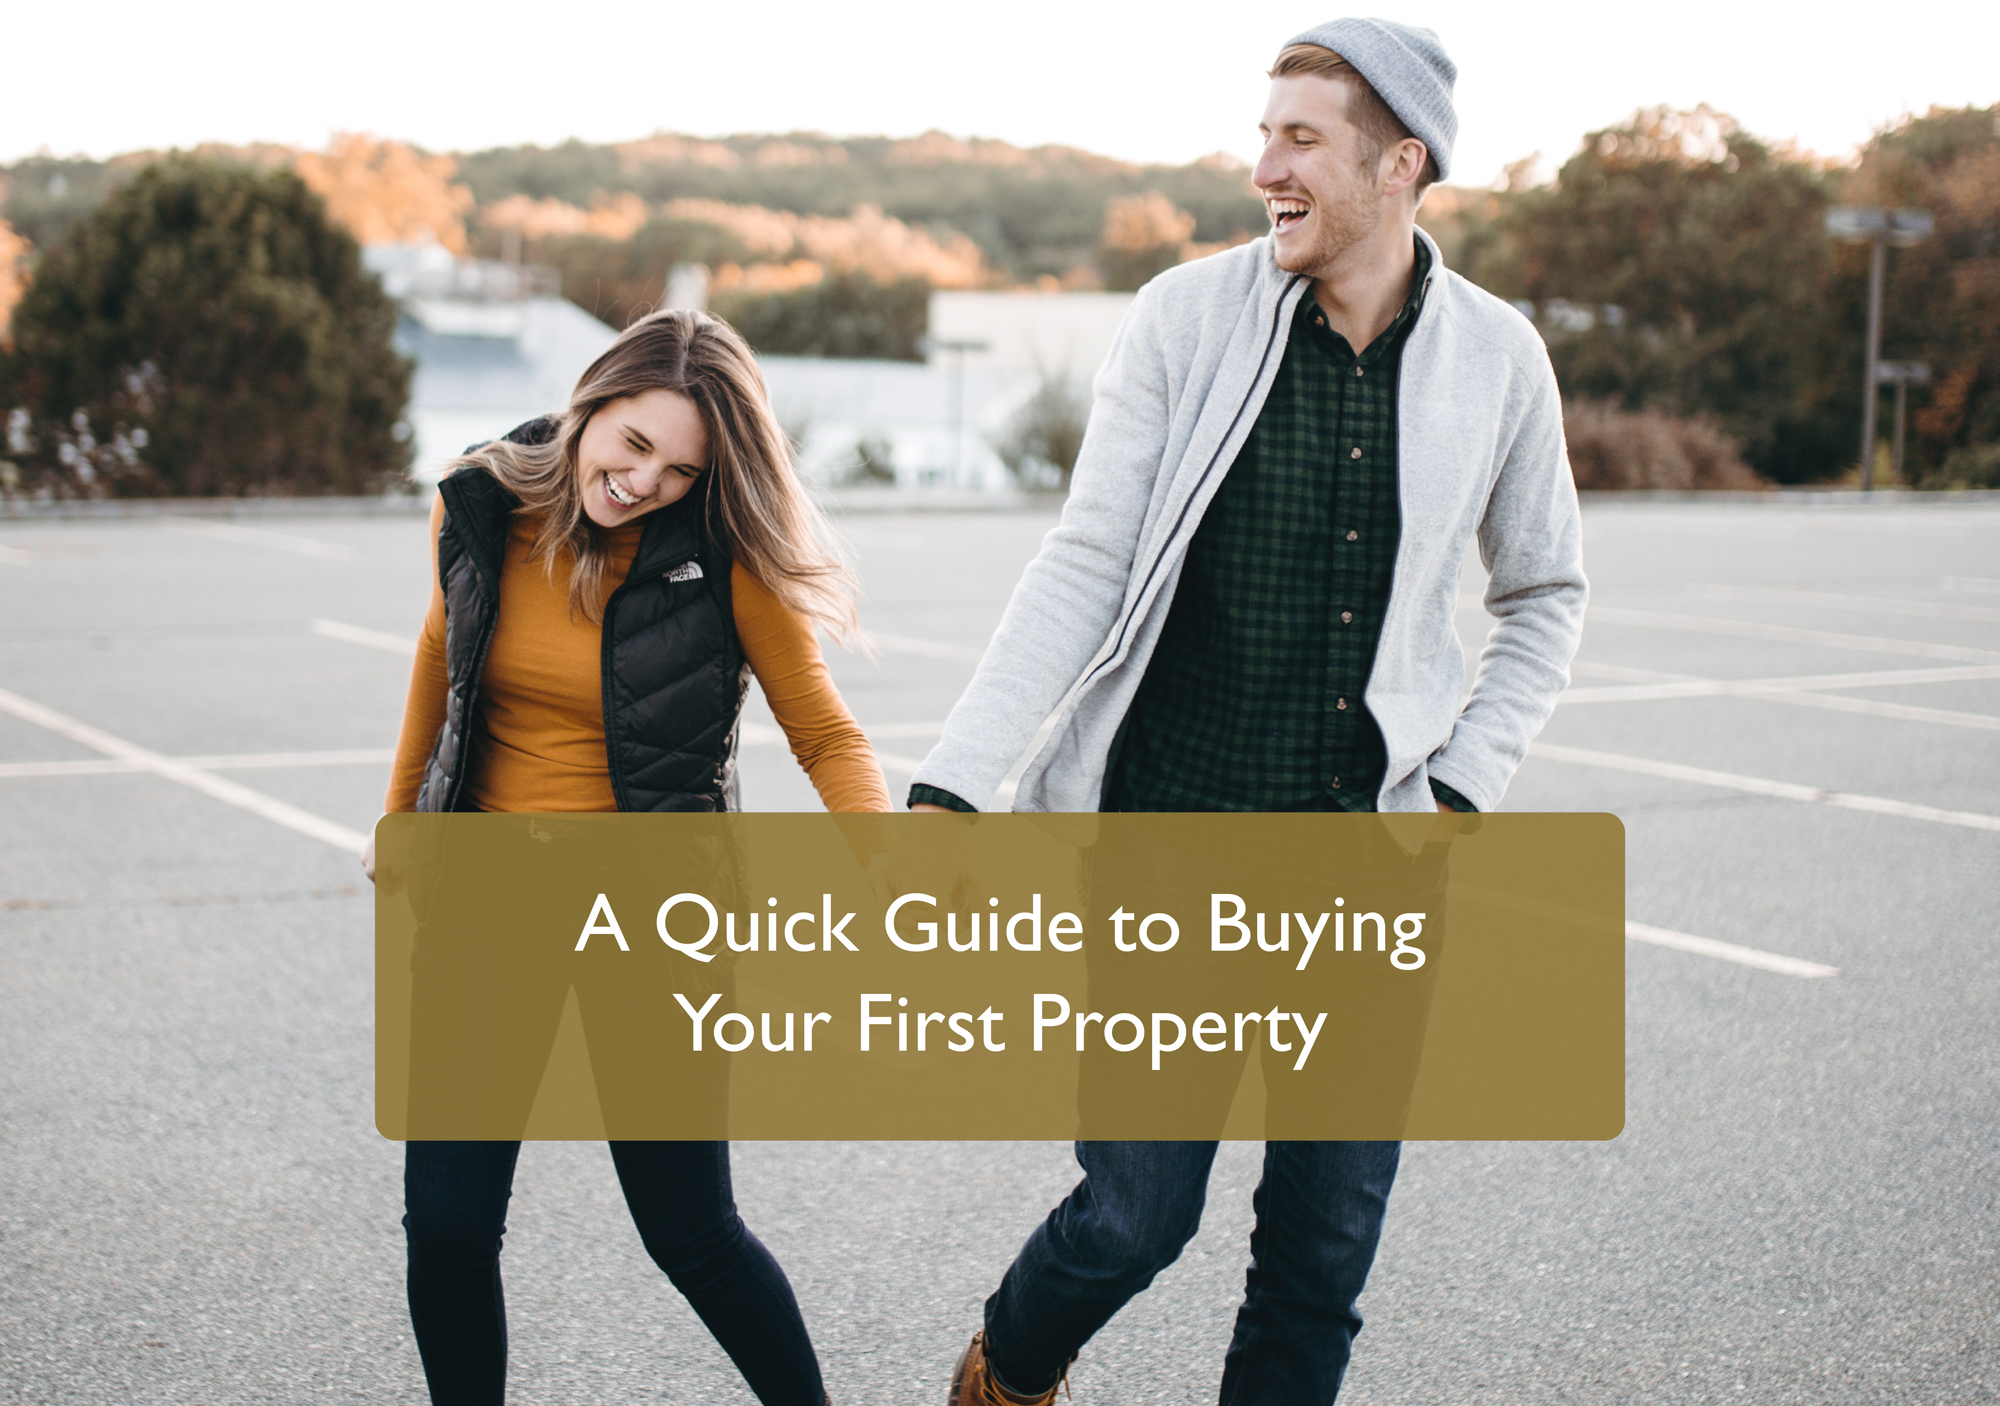 A Quick Guide to Buying Your First Property